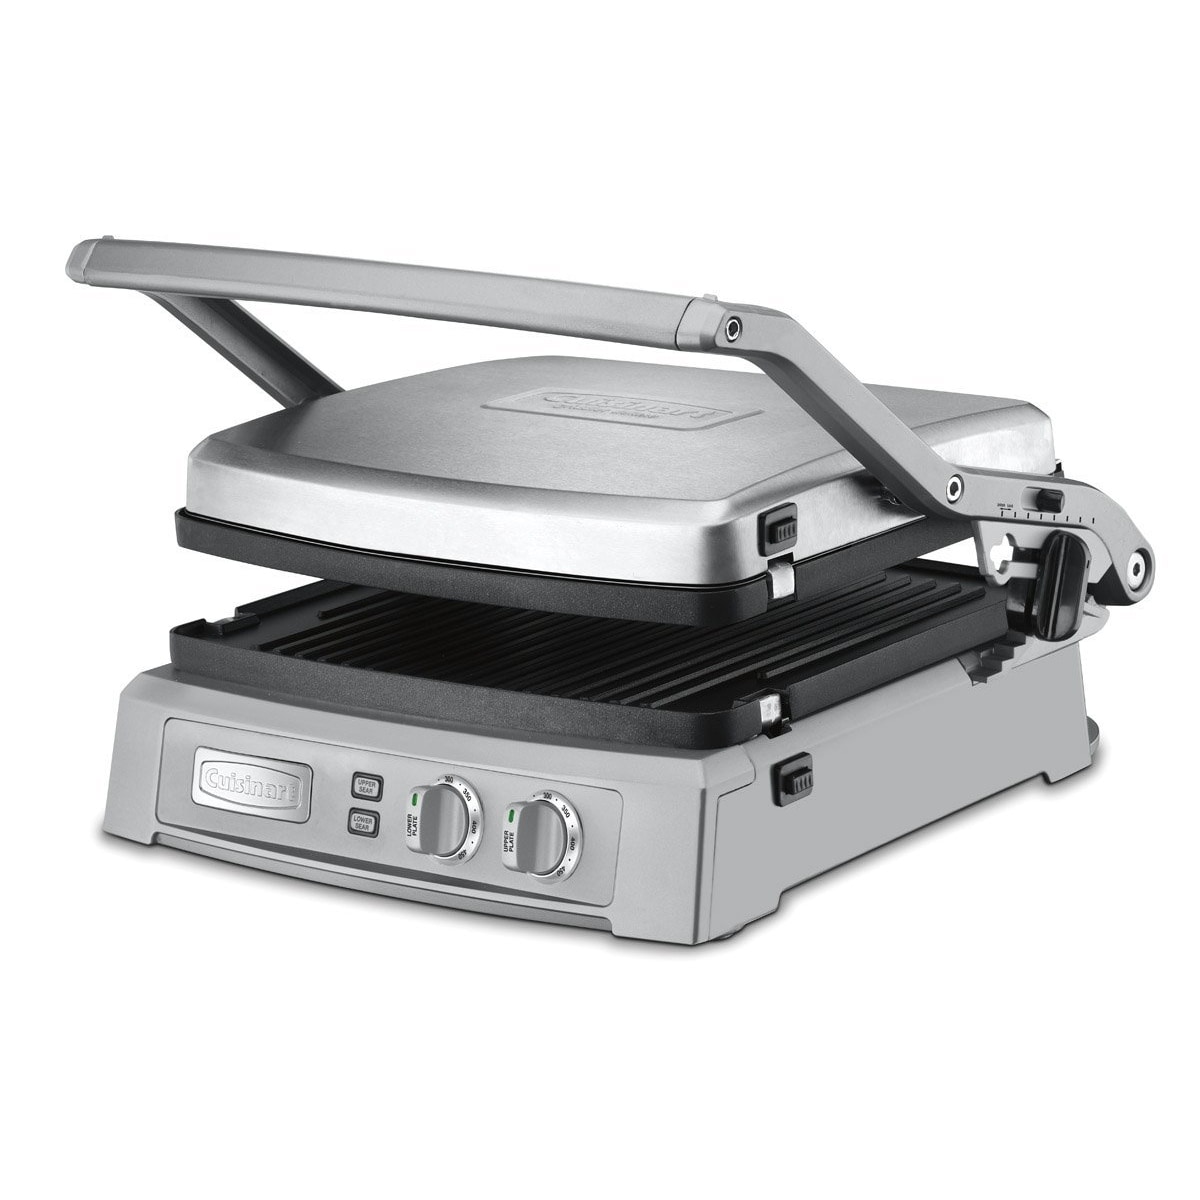 Cuisinart CSK-150 1500-Watt Nonstick Oval Electric Skillet,Brushed  Stainless 